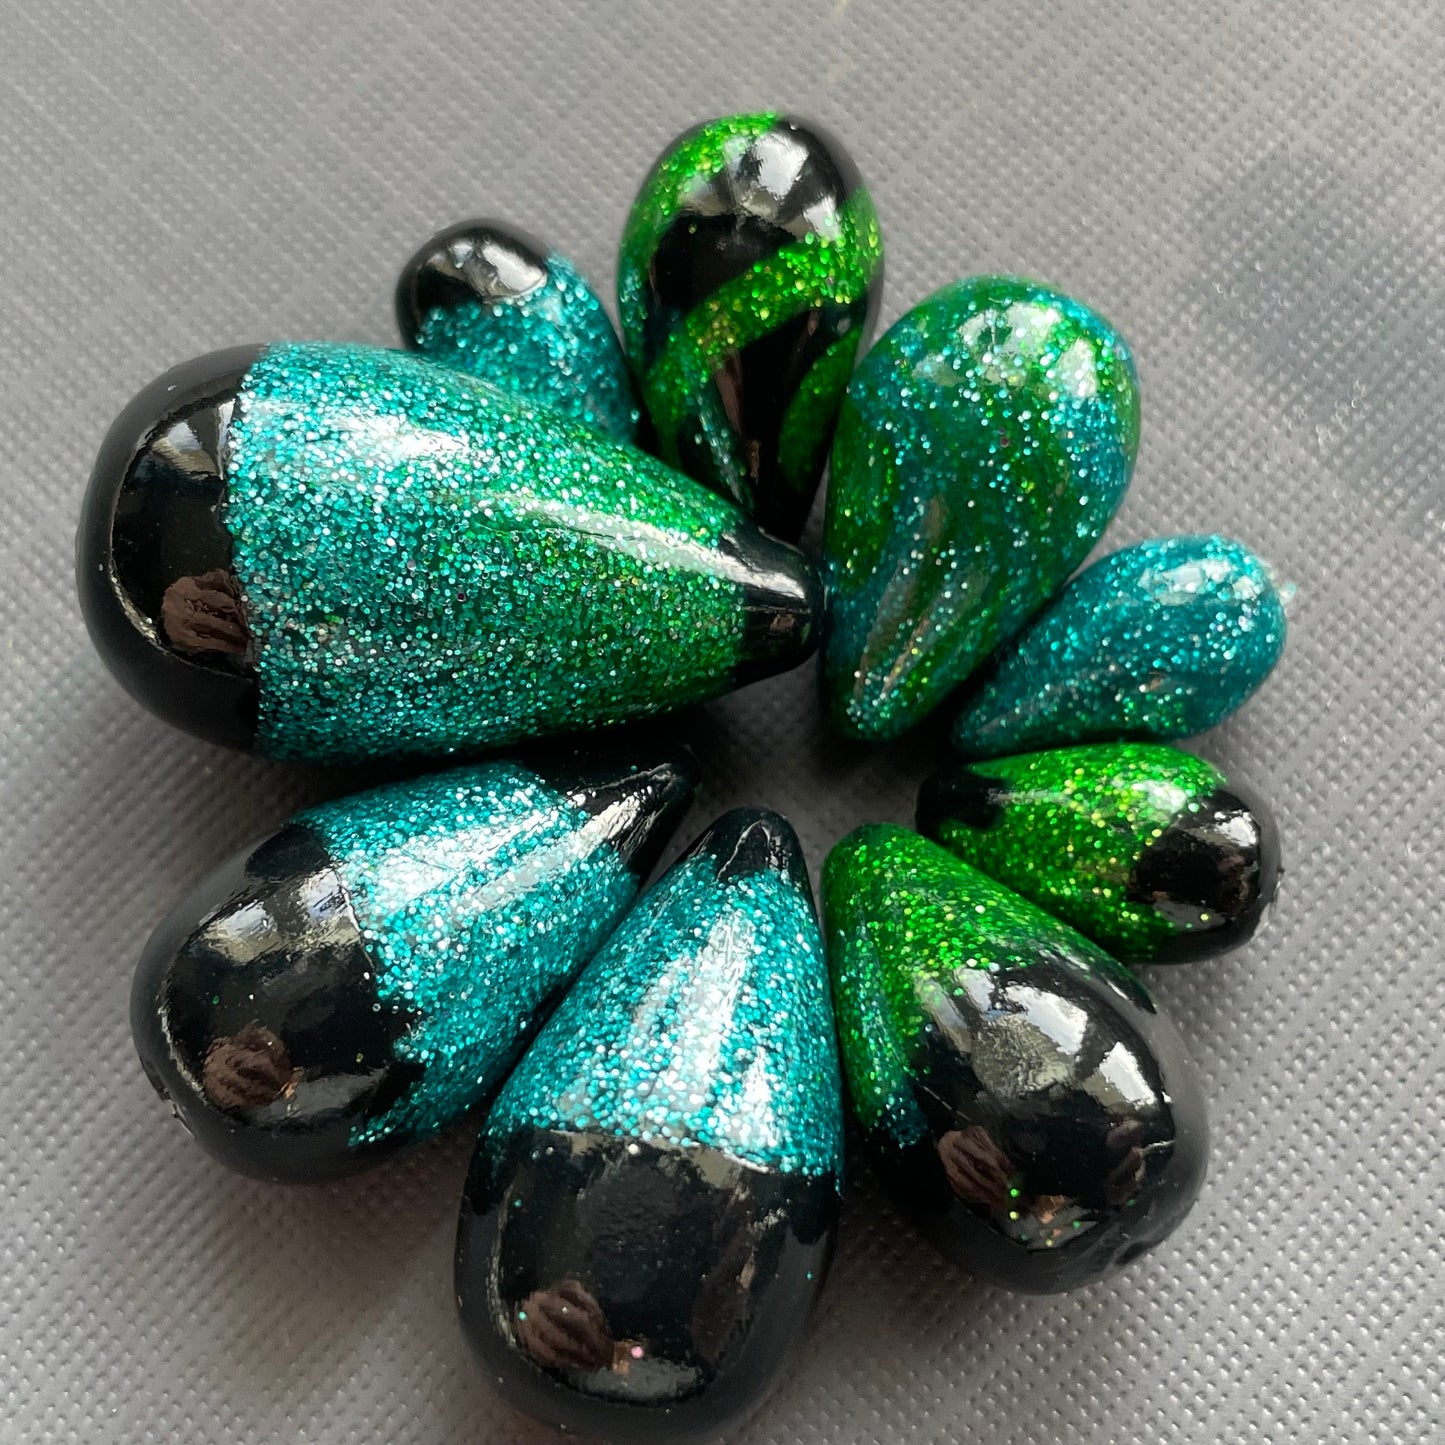 Teardrop bead roller - made for use with polymer clay